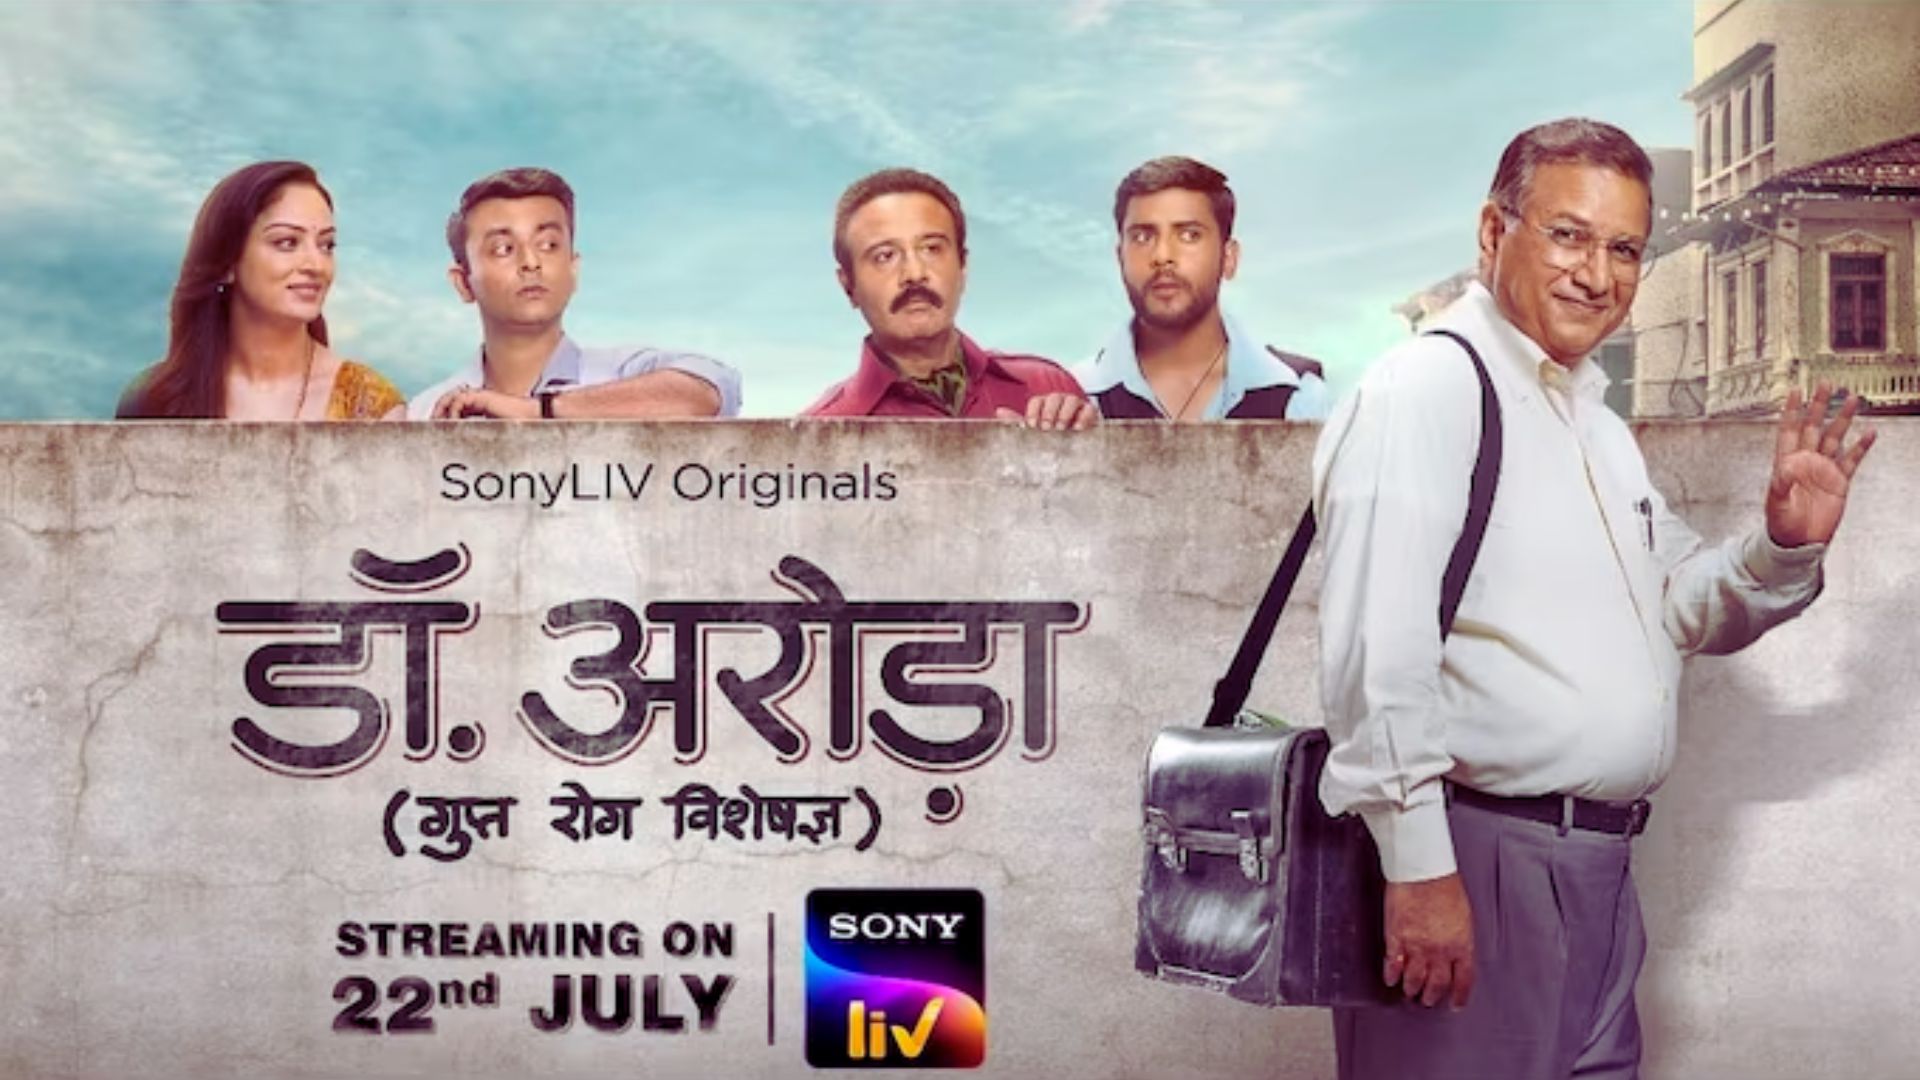 How To Watch Dr Arora Web Series Online For Free?